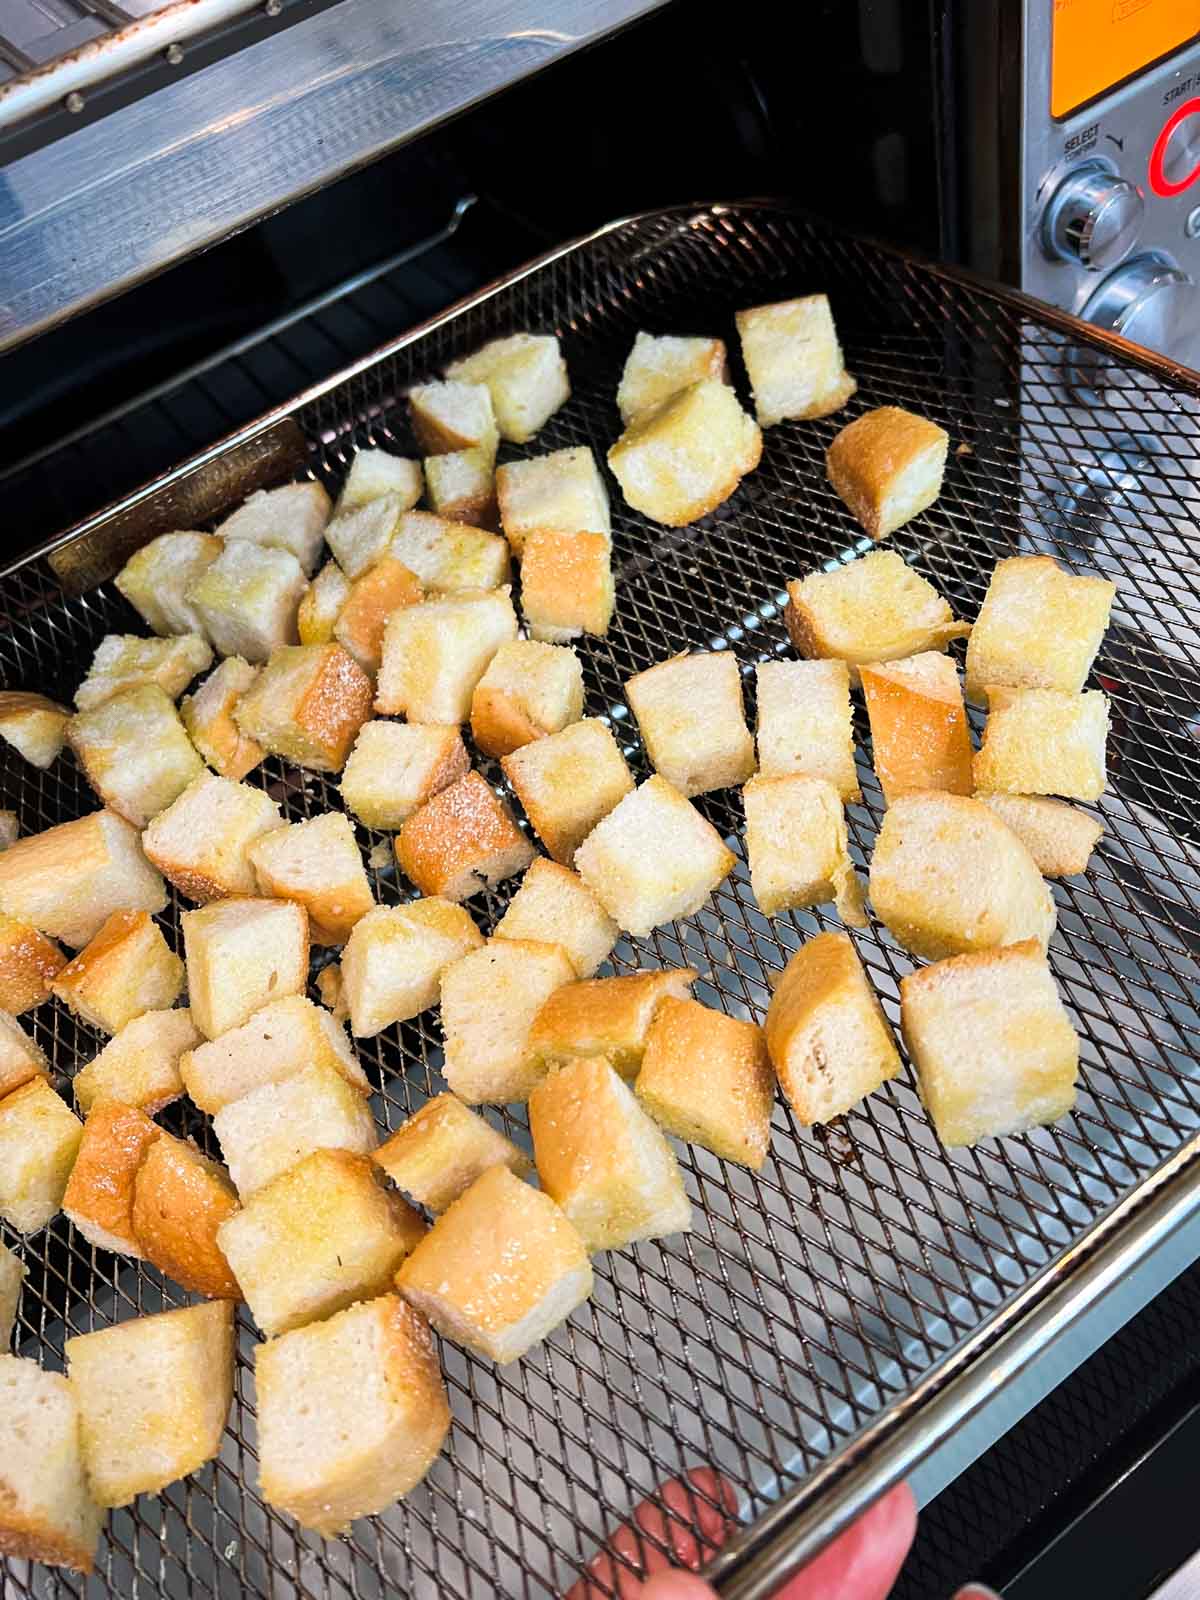 cubed bread spread out on an air fryer basket tray